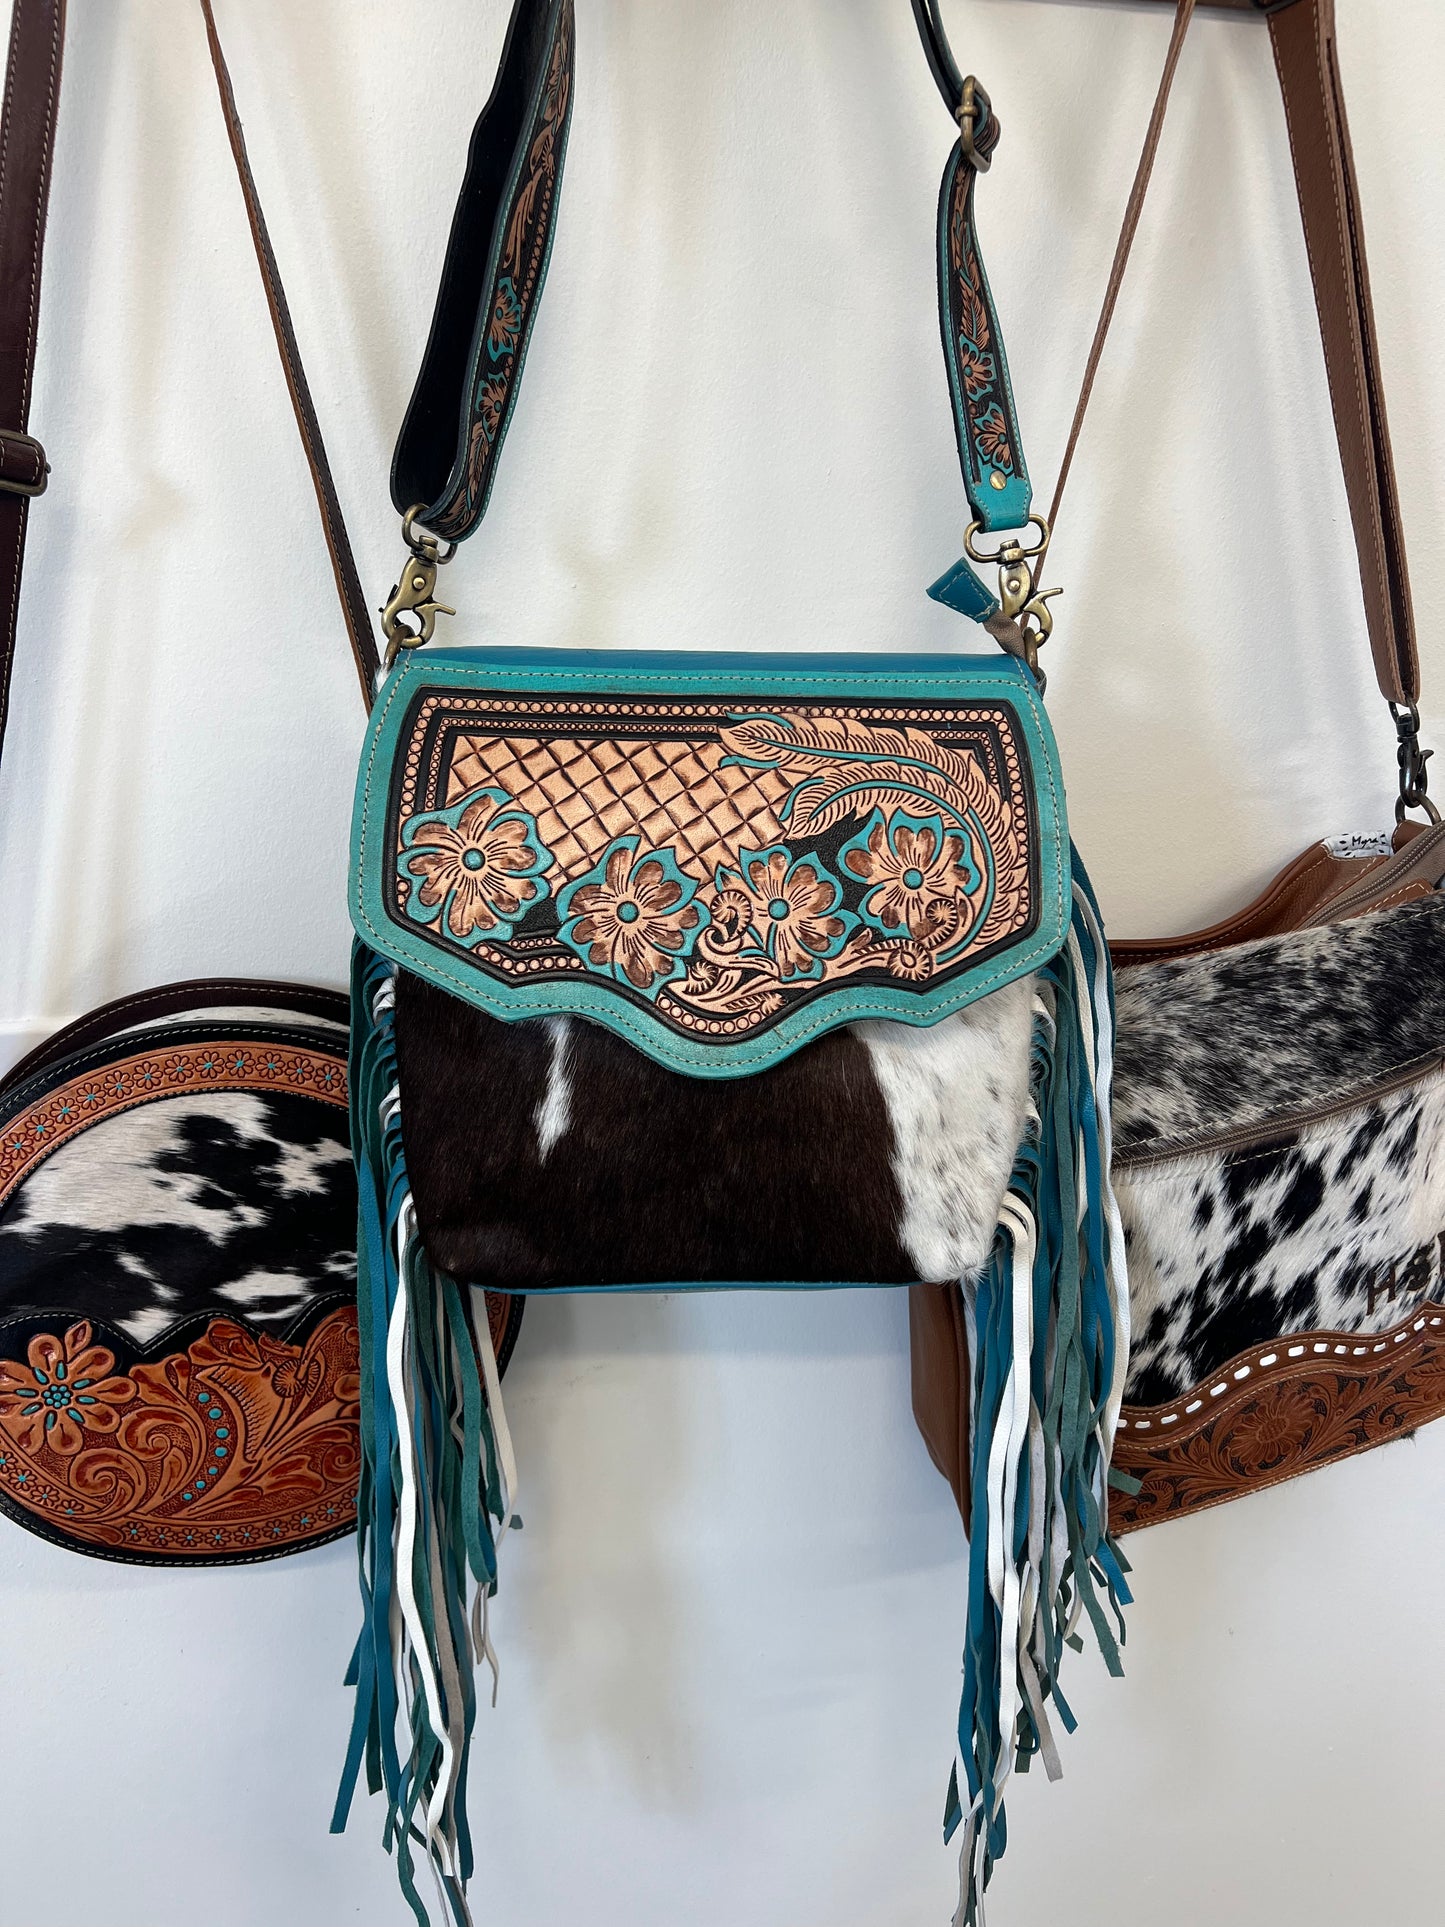 The Tooled Leather Tumbleweed cowhide PURSE TOTE – Southwest Bedazzle